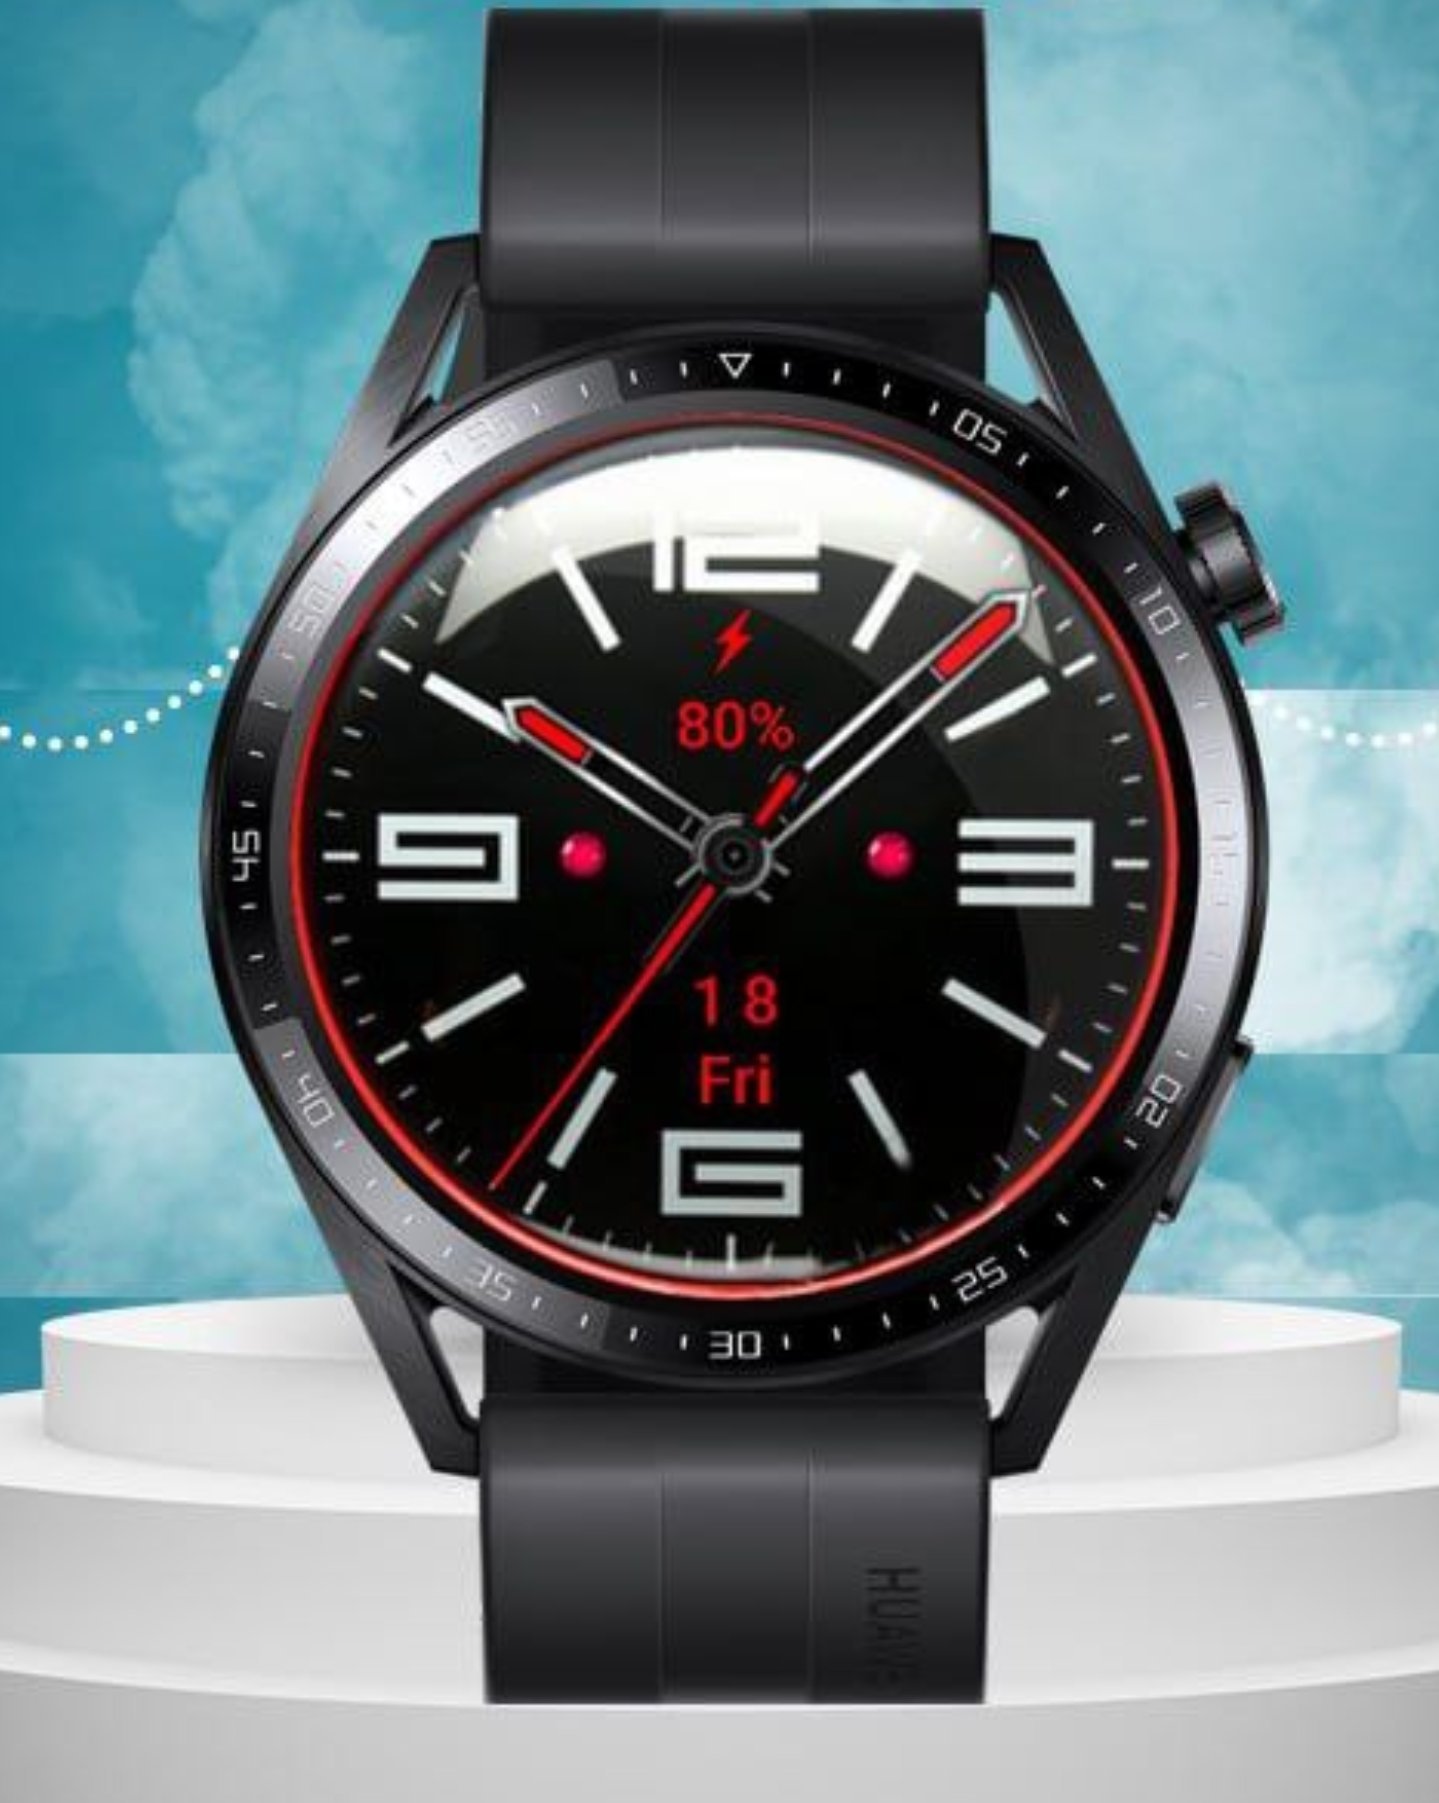 Simple clean and clear analog watch face with glass reflection